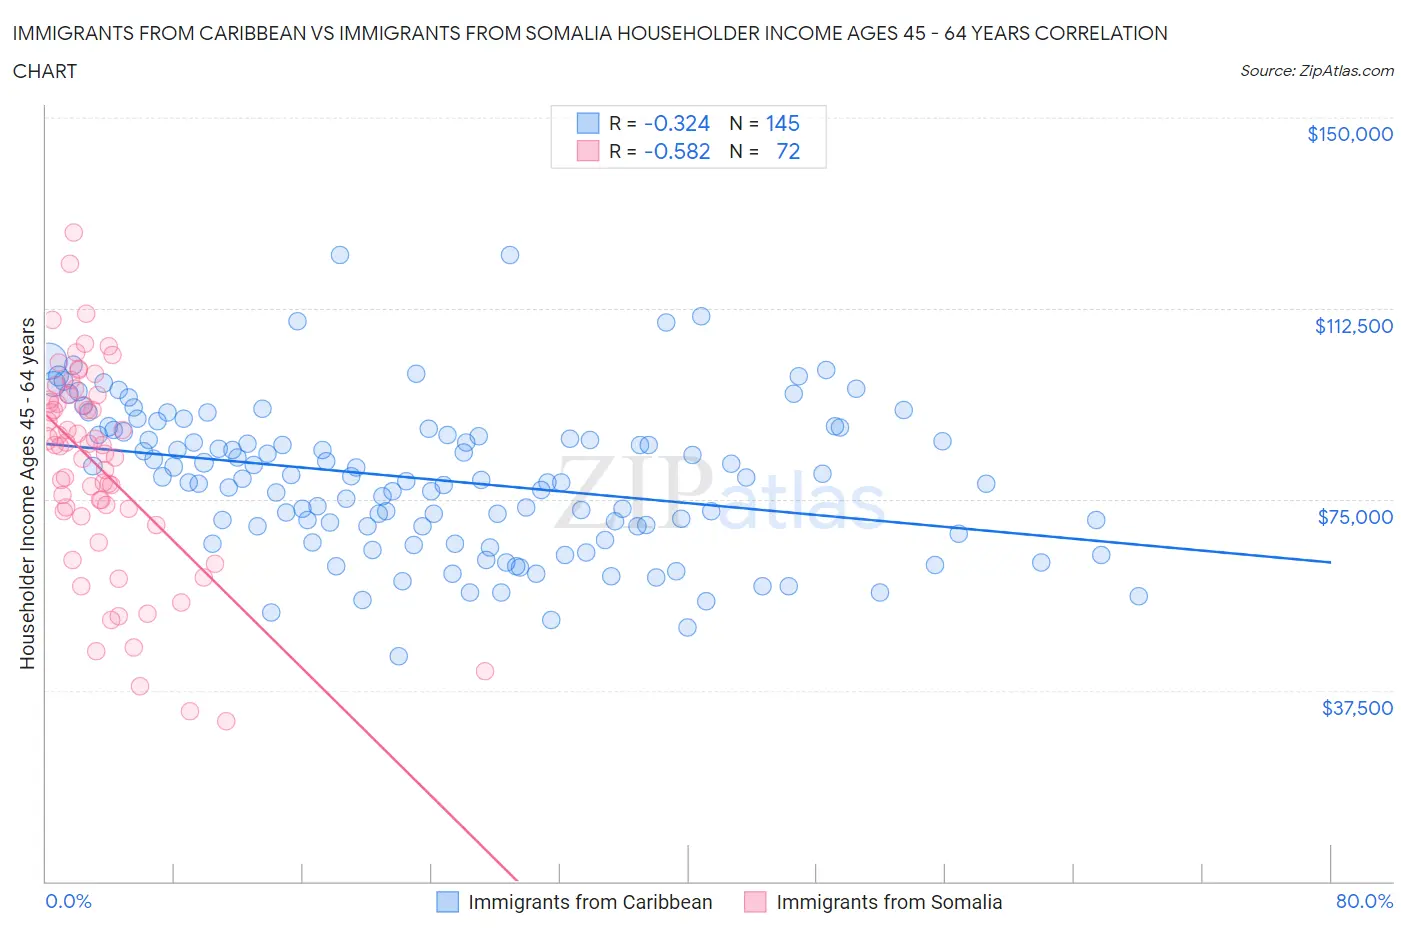 Immigrants from Caribbean vs Immigrants from Somalia Householder Income Ages 45 - 64 years